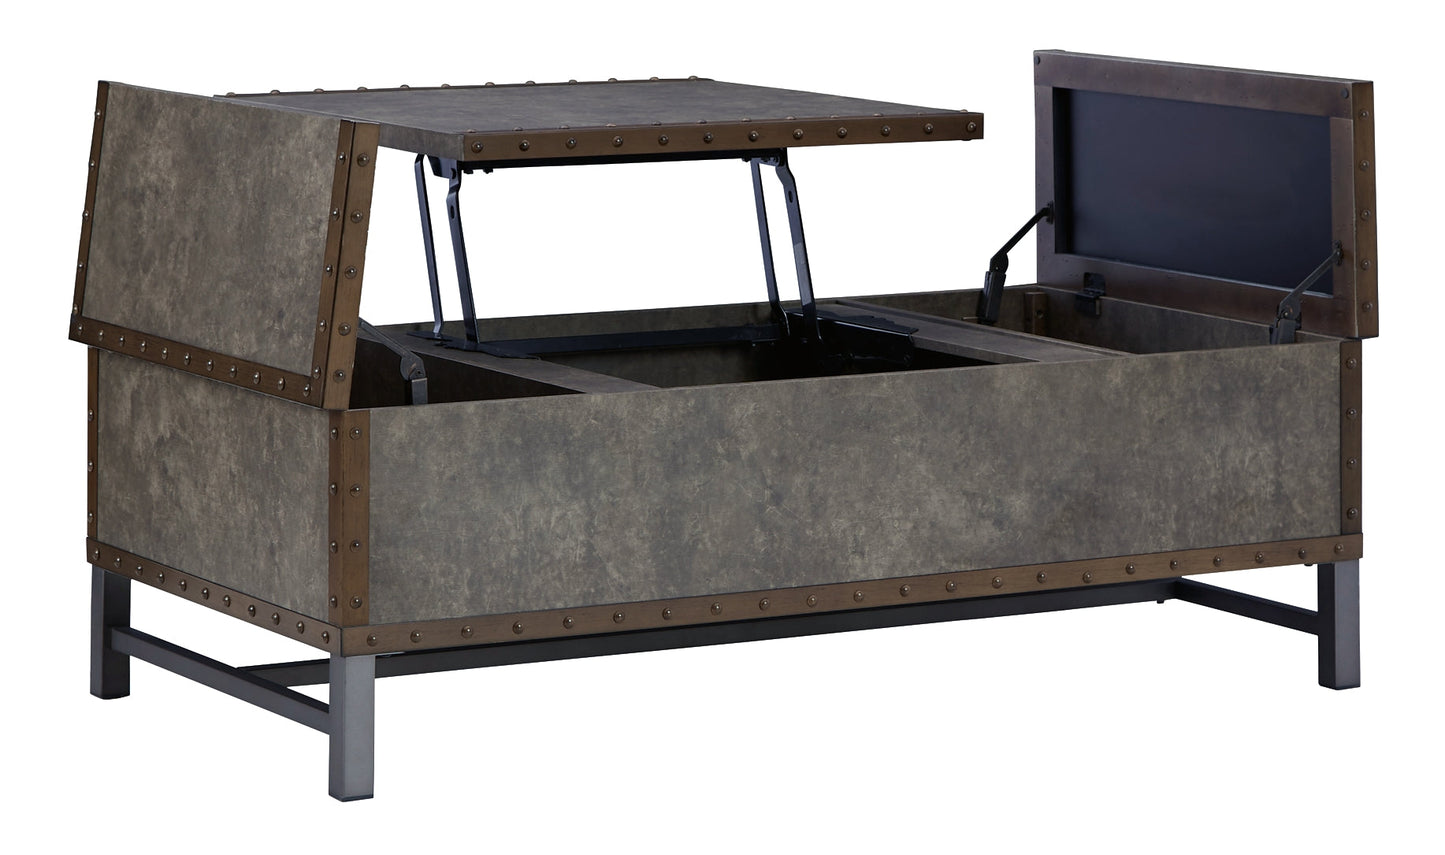 Derrylin Lift Top Cocktail Table at Cloud 9 Mattress & Furniture furniture, home furnishing, home decor